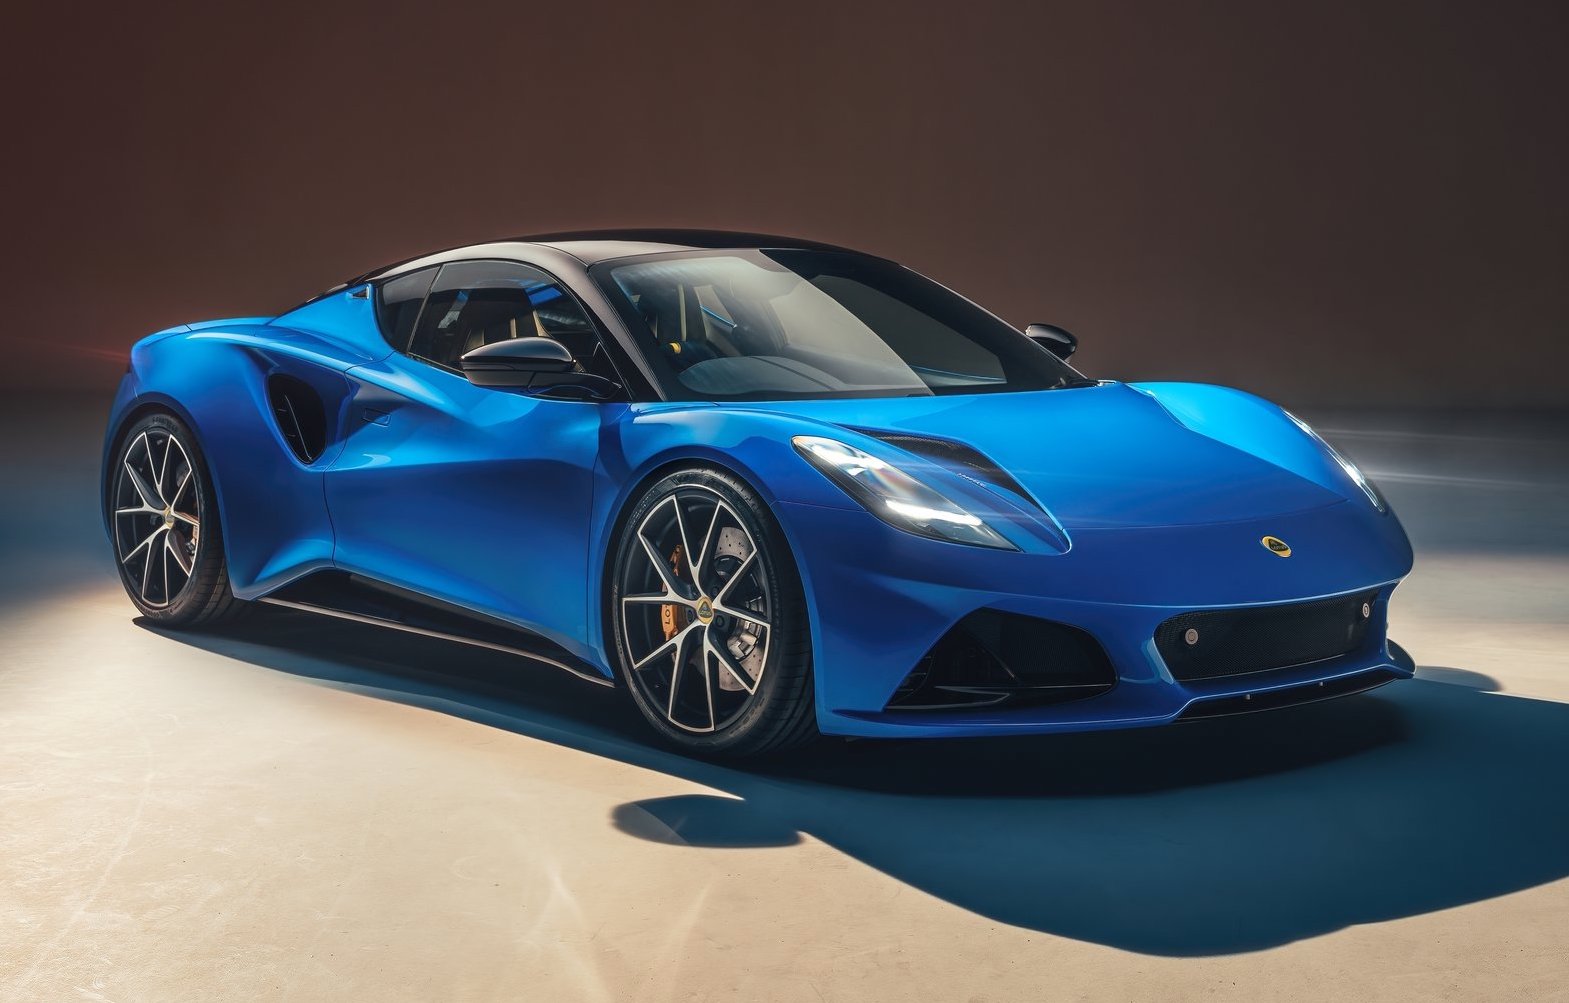 Lotus unveils all-new mid-engine sports car; the Emira